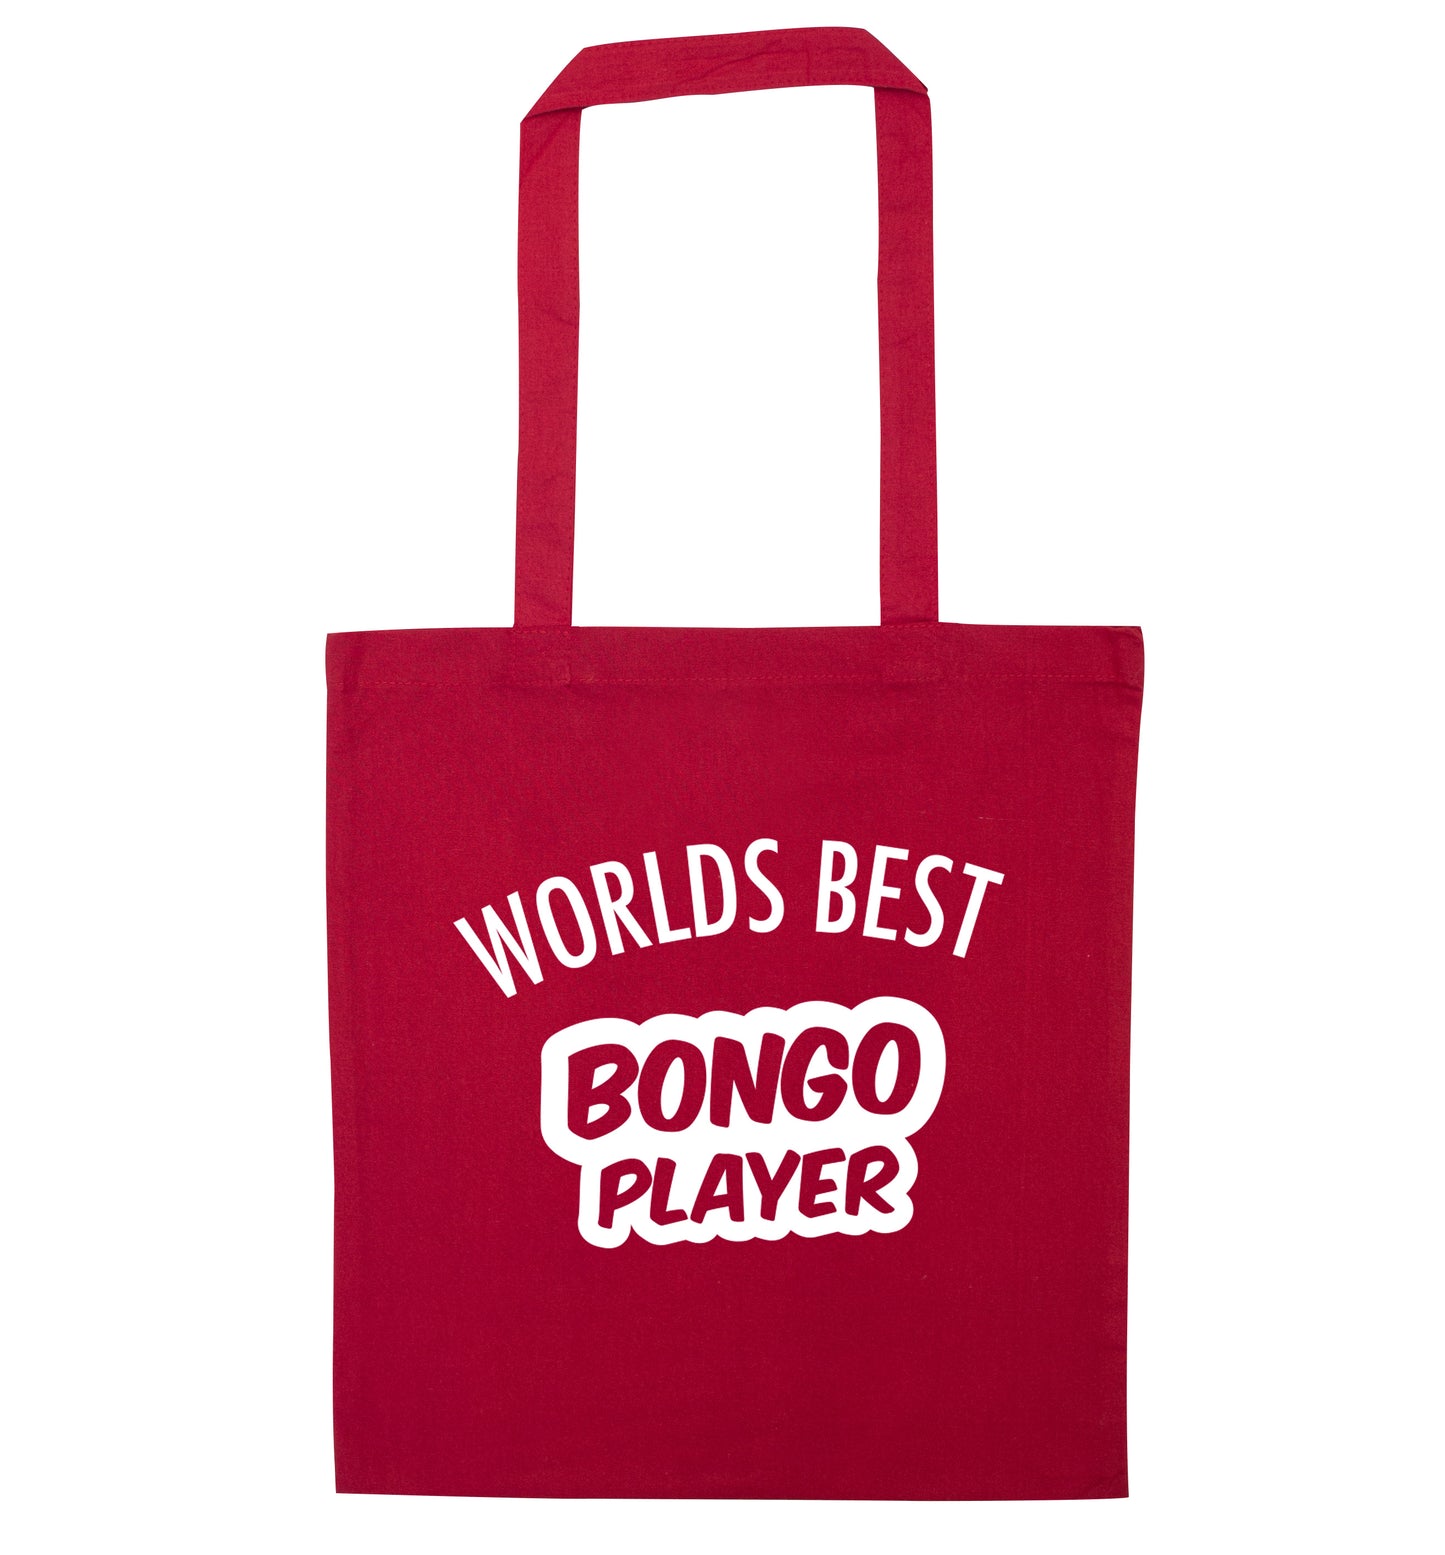 Worlds best bongo player red tote bag